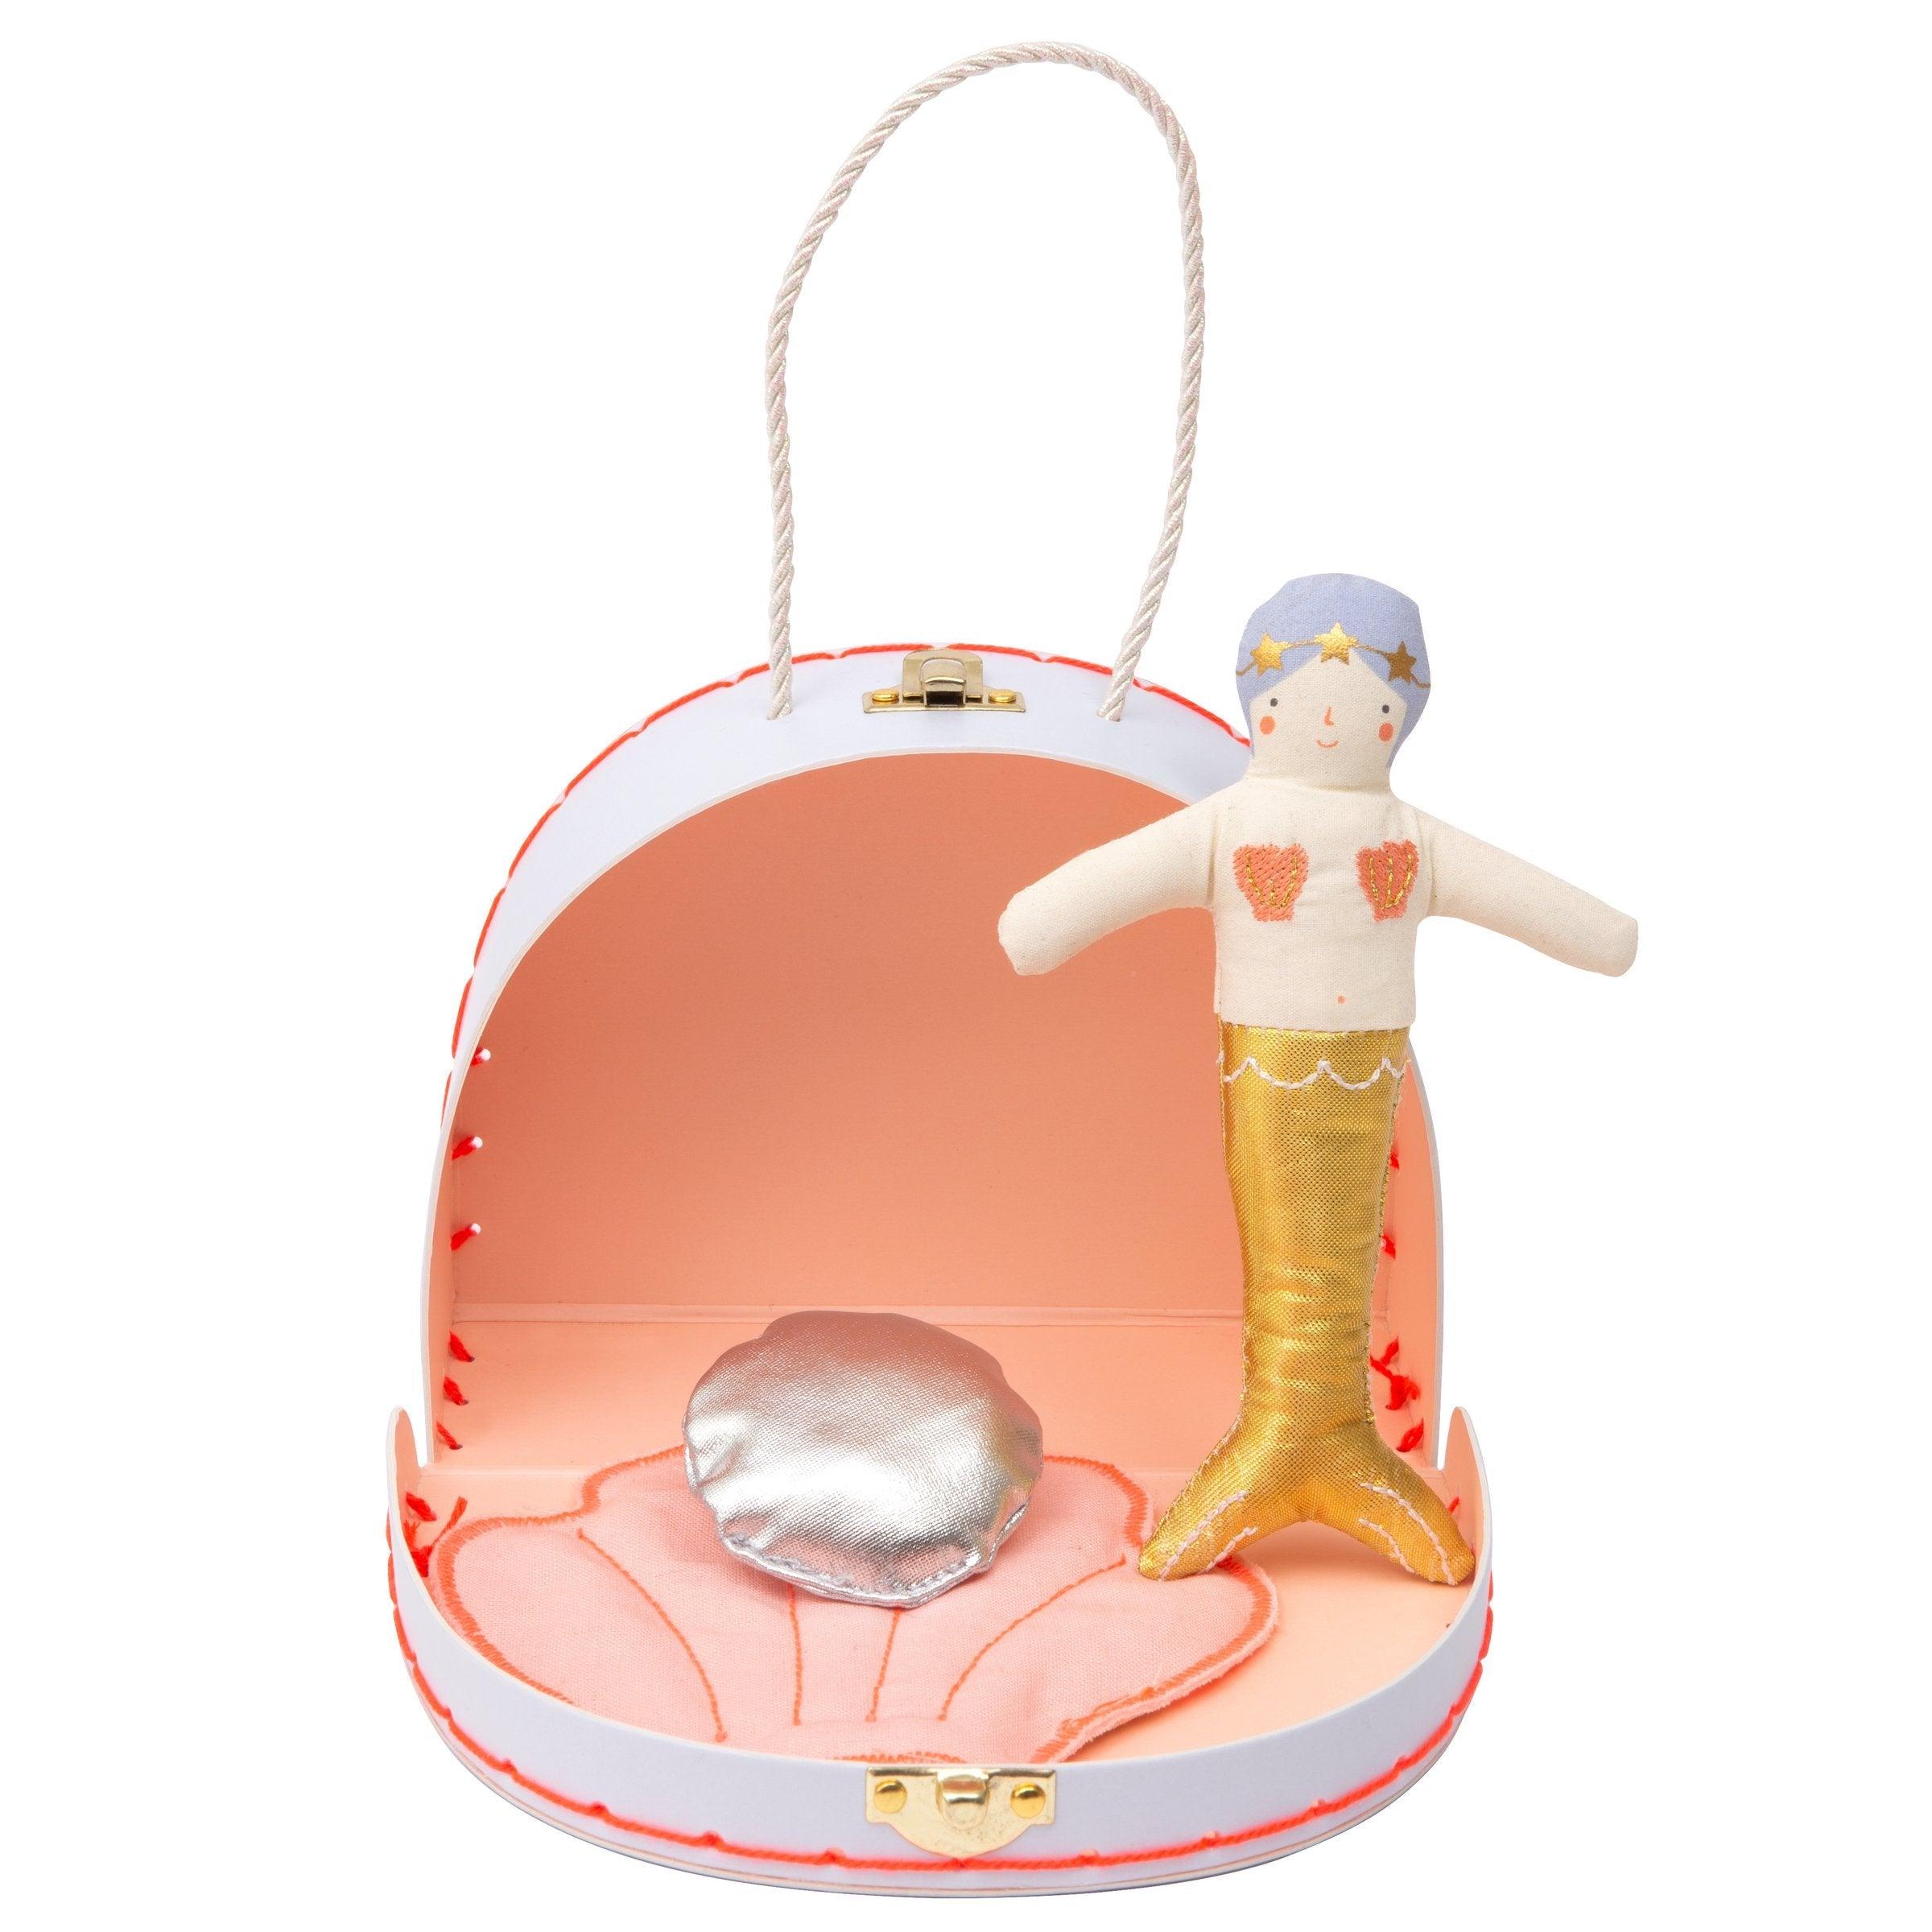 Mermaid Mini Suitcase Doll - Why and Whale